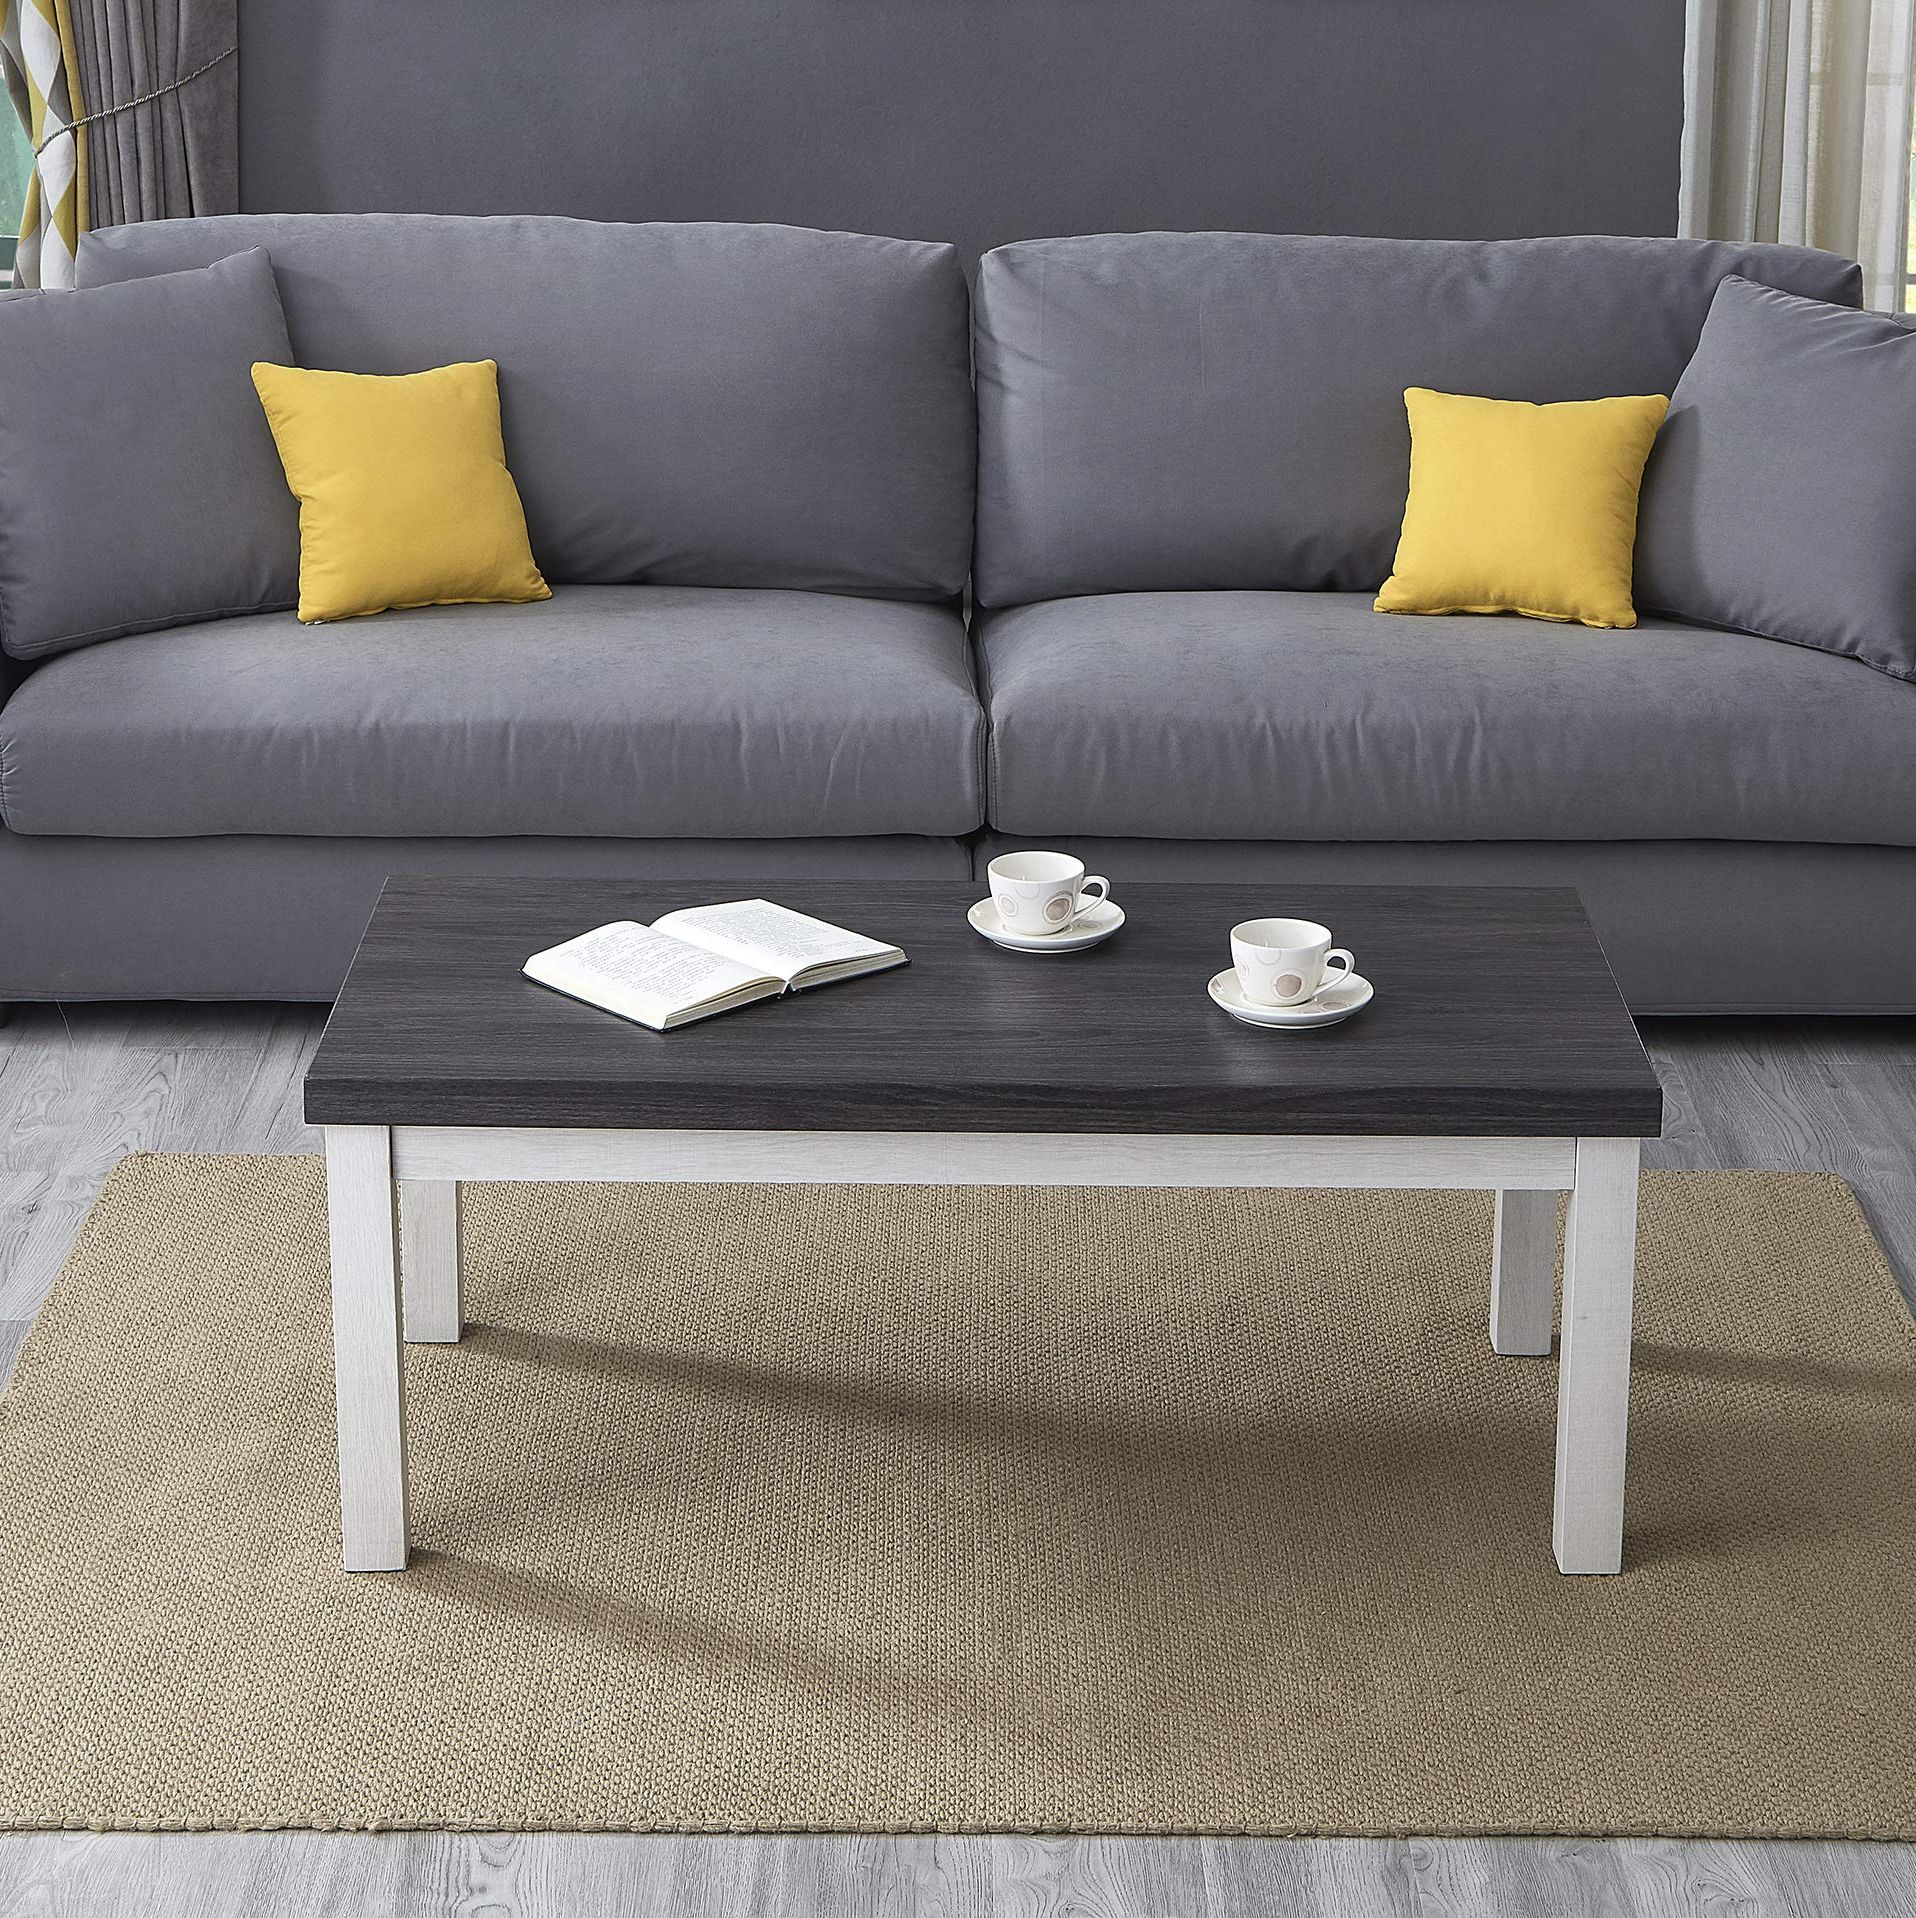 Amazon: Roundhill Furniture Ronan Two Tone Wood Rectangle Coffee Table,  Gray : Home & Kitchen Throughout Fashionable Pemberly Row Replicated Wood Coffee Tables (View 4 of 10)